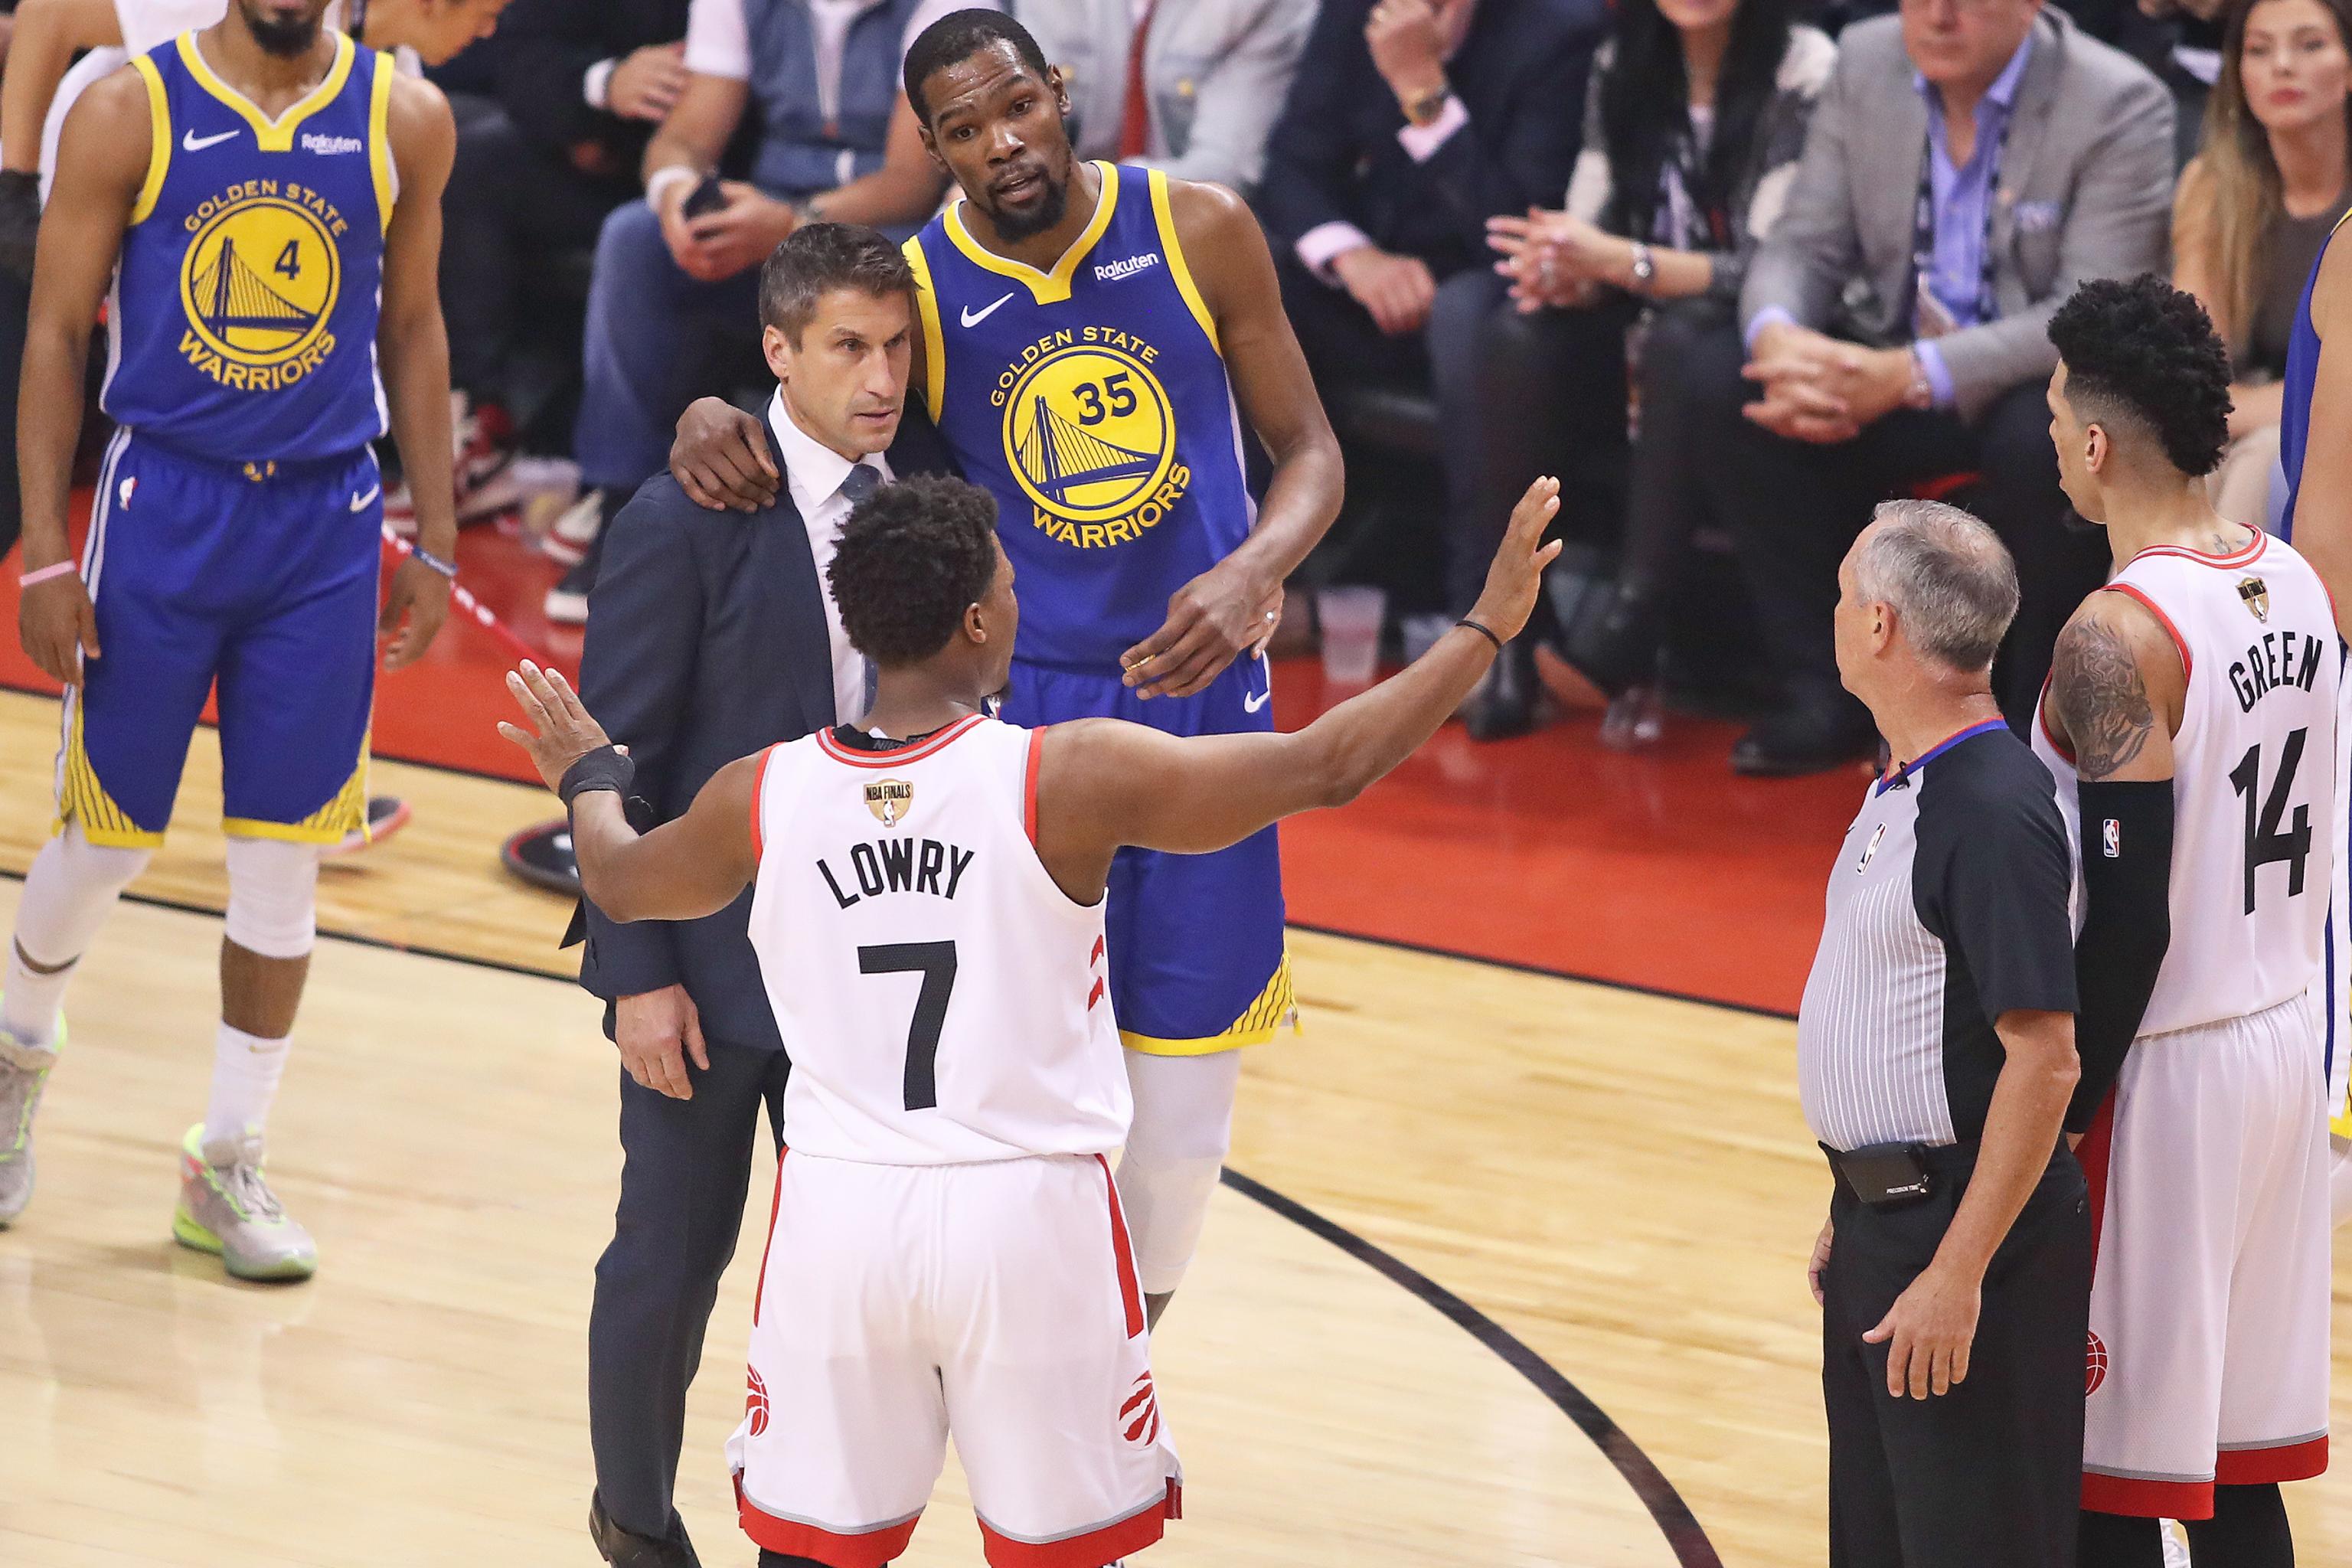 Kevin Durant injury fallout: Raptors fan's GoFundMe page benefits